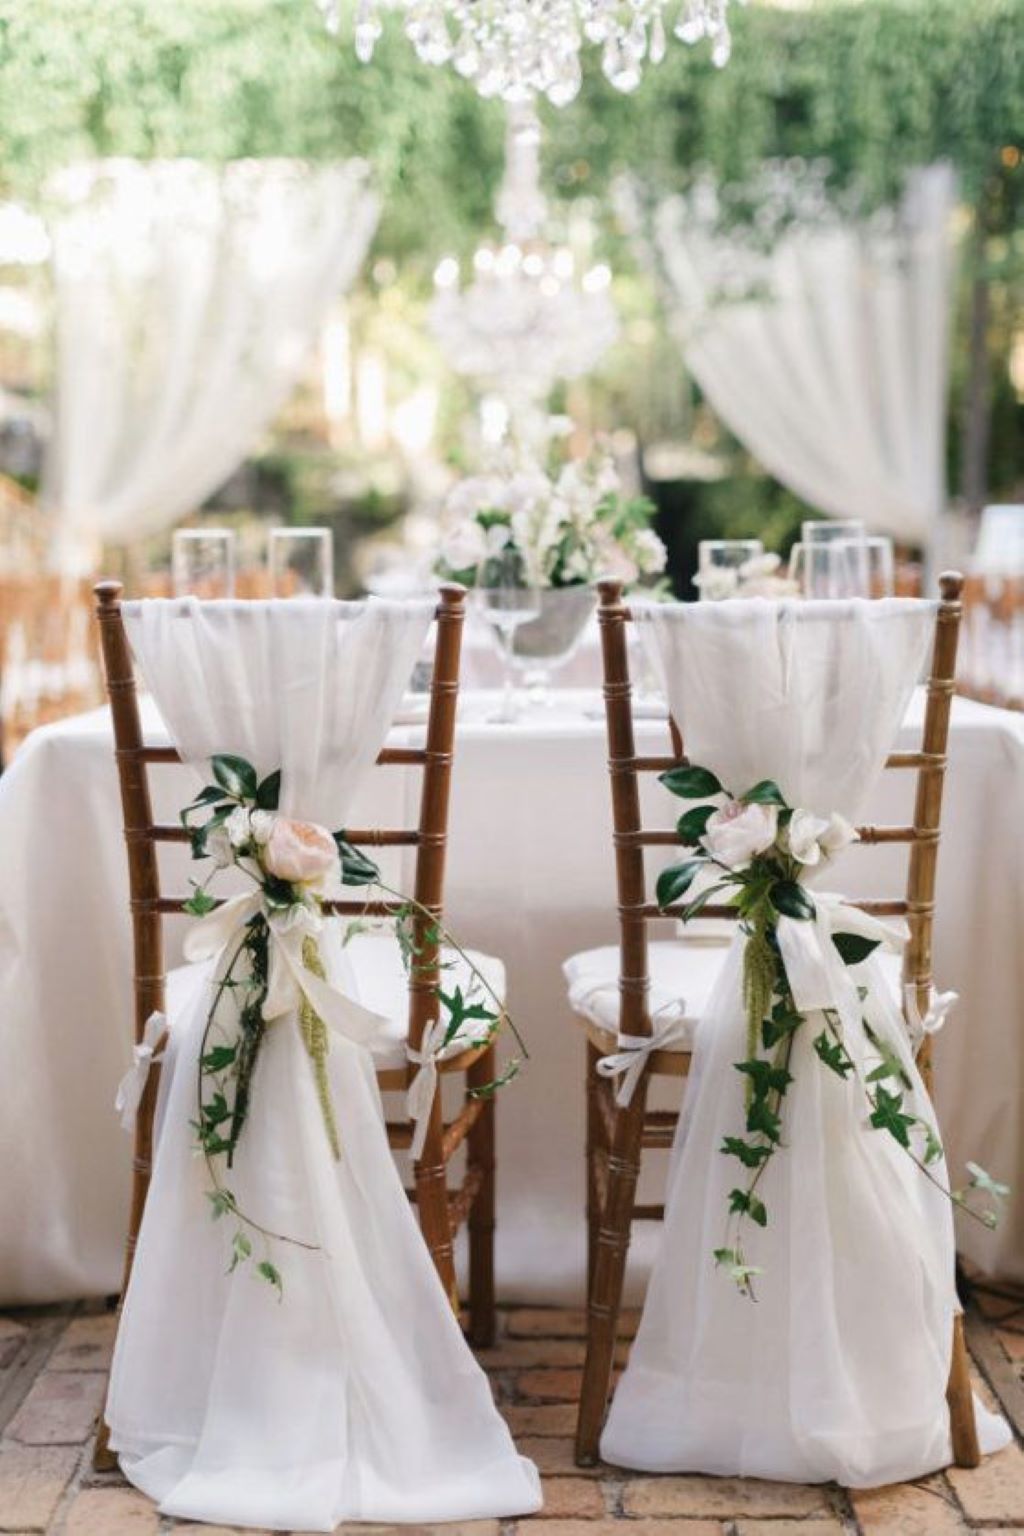 Why Decorate Banquet Chairs